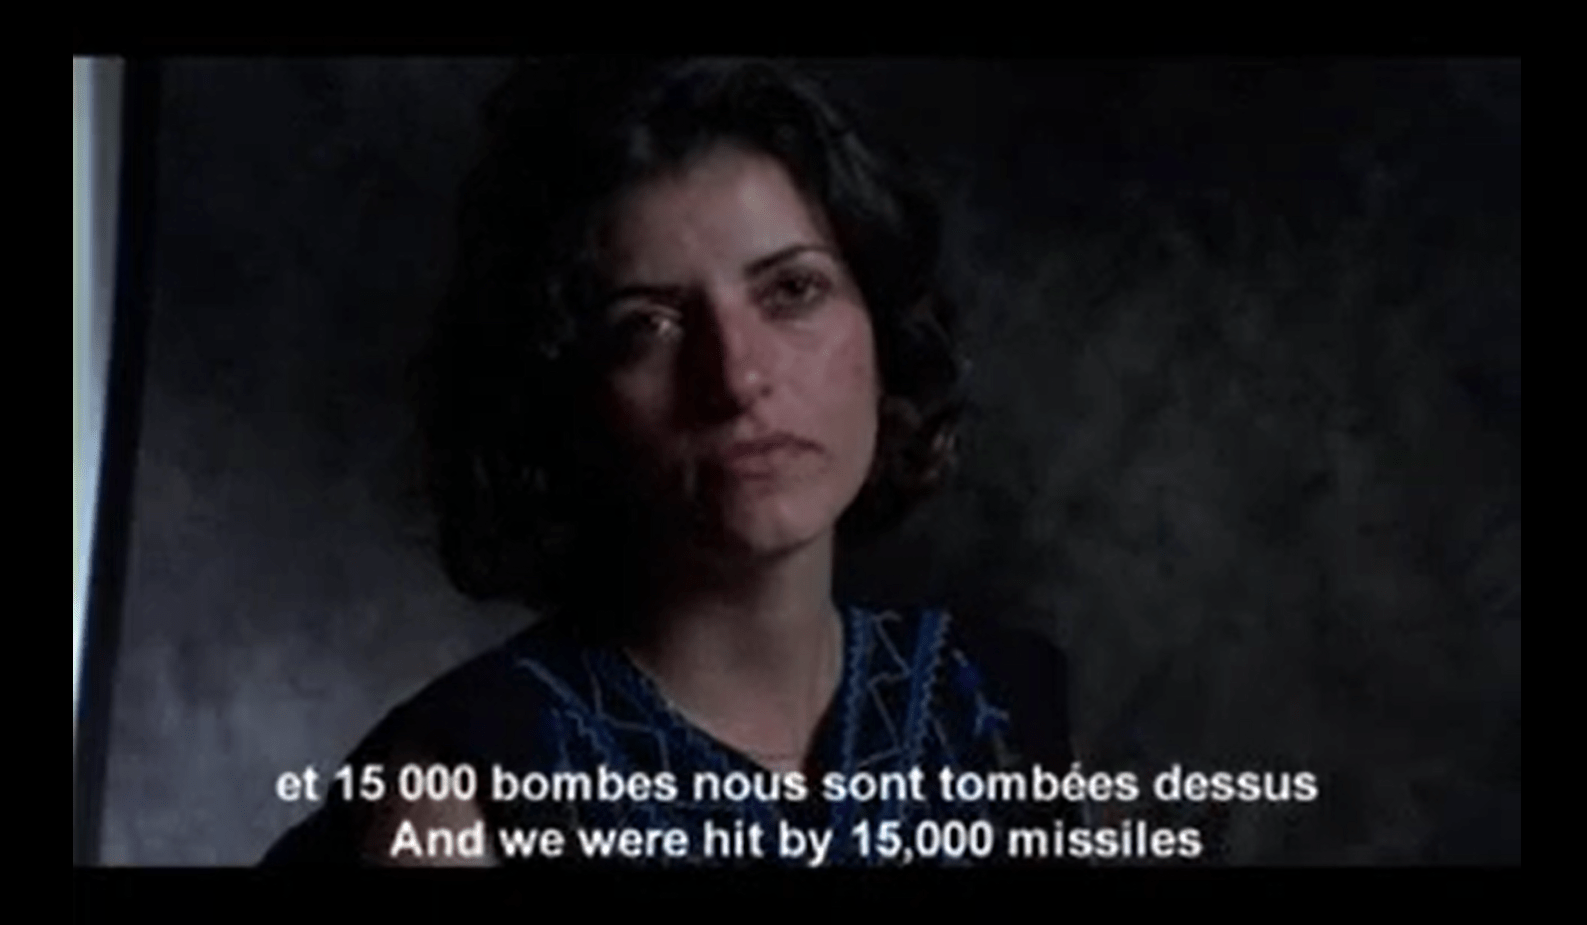 A screenshot from a film; the subtitles read: "And we were hit by 15,000 missiles"